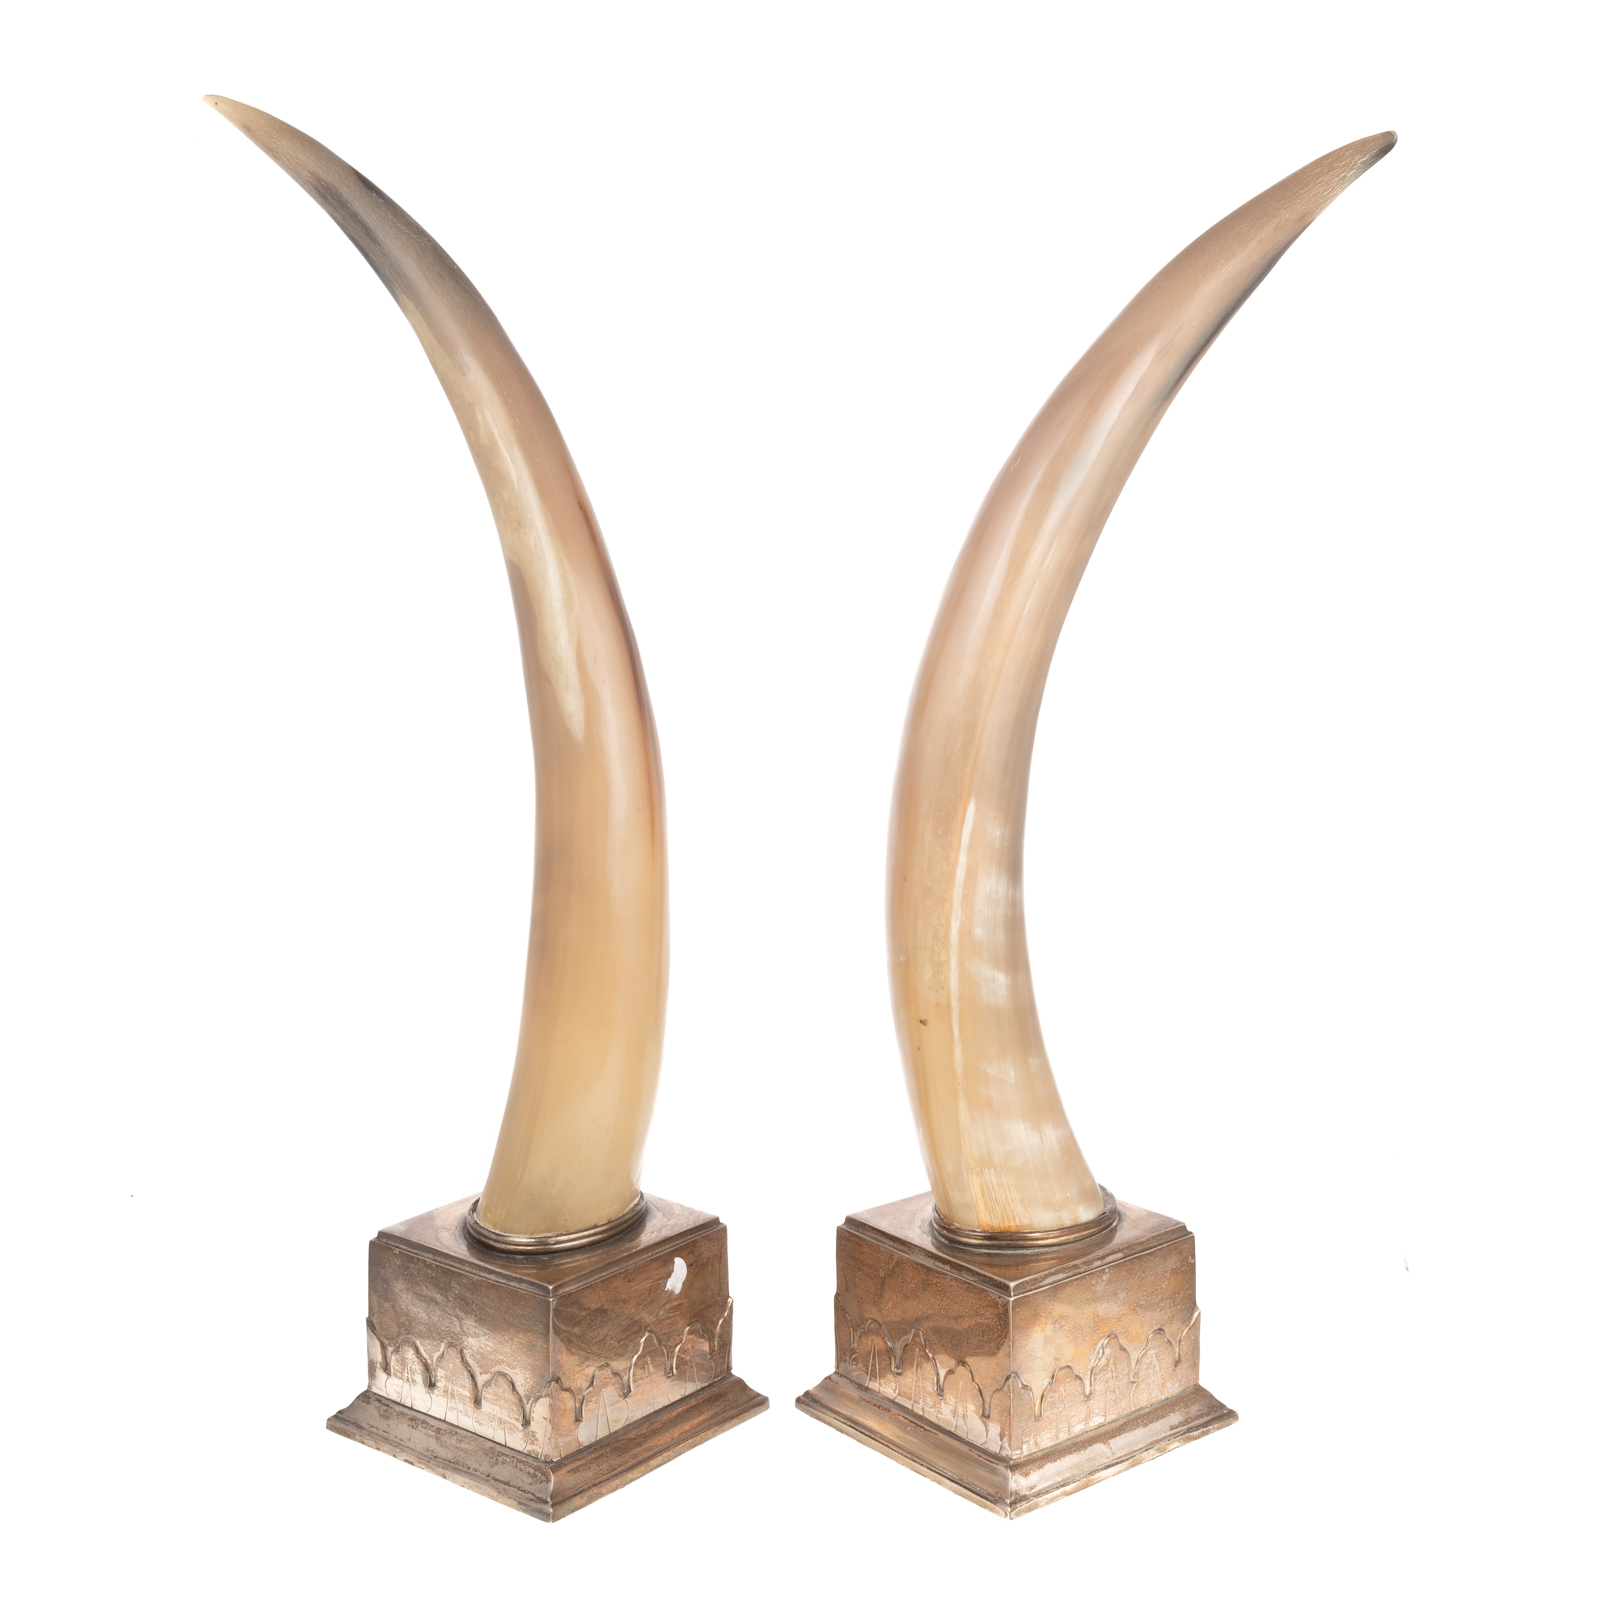 A PAIR OF DECORATIVE HORNS Dated